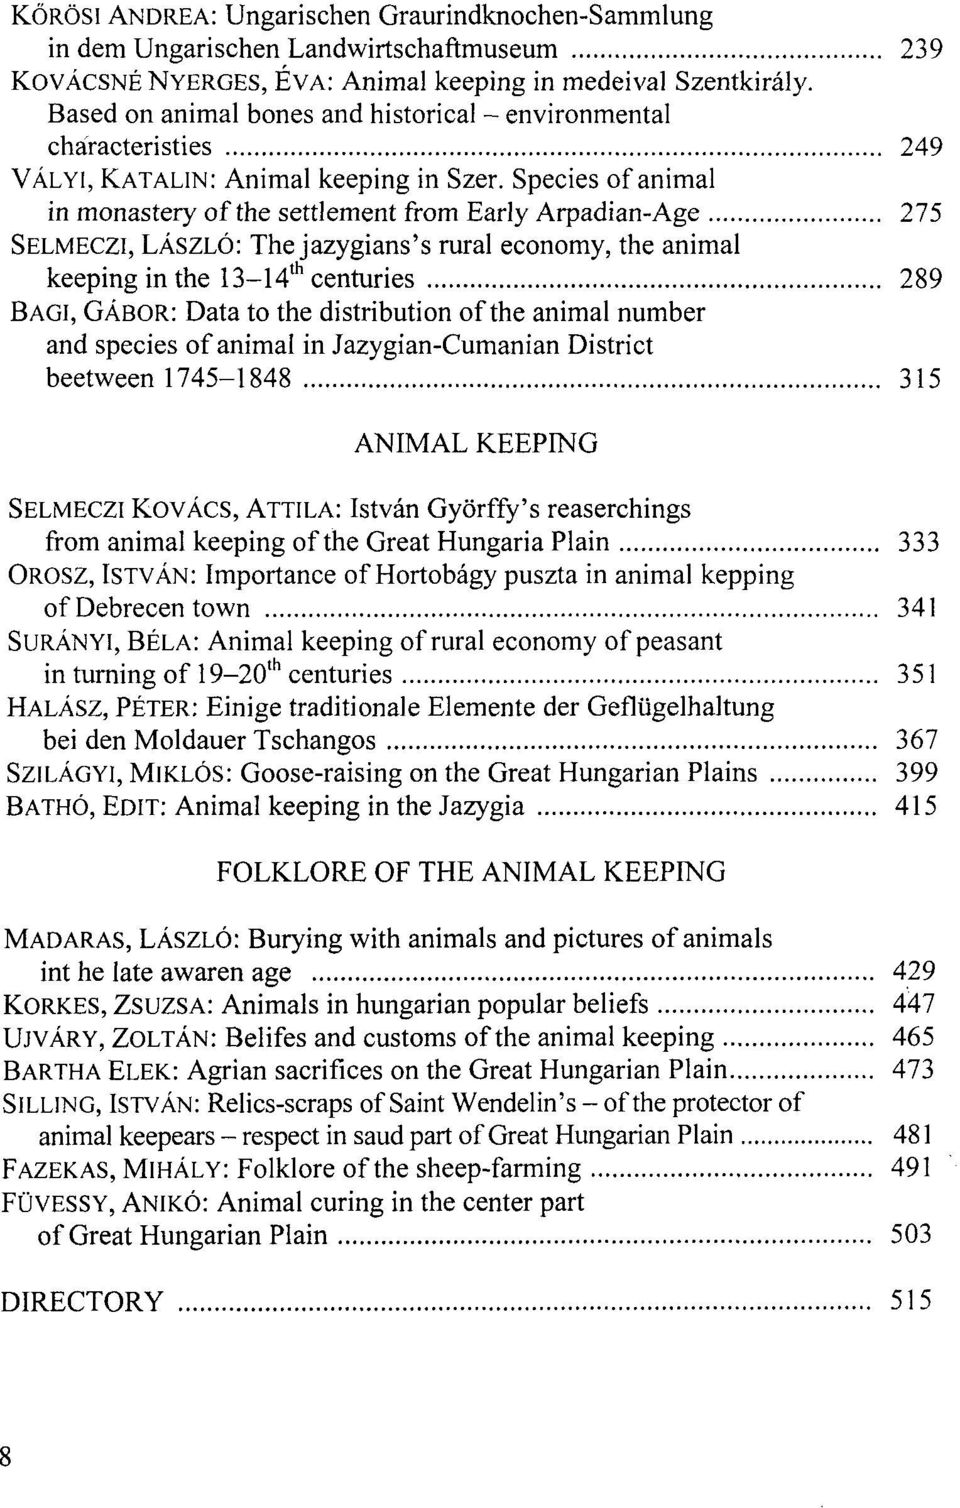 Species of animál in monastery of the settlement from Early Arpadian-Age 275 SELMECZI, LÁSZLÓ: The jazygians's rural economy, the animál keeping in the 13 14 th centuries 289 BAGI, GÁBOR: Data to the